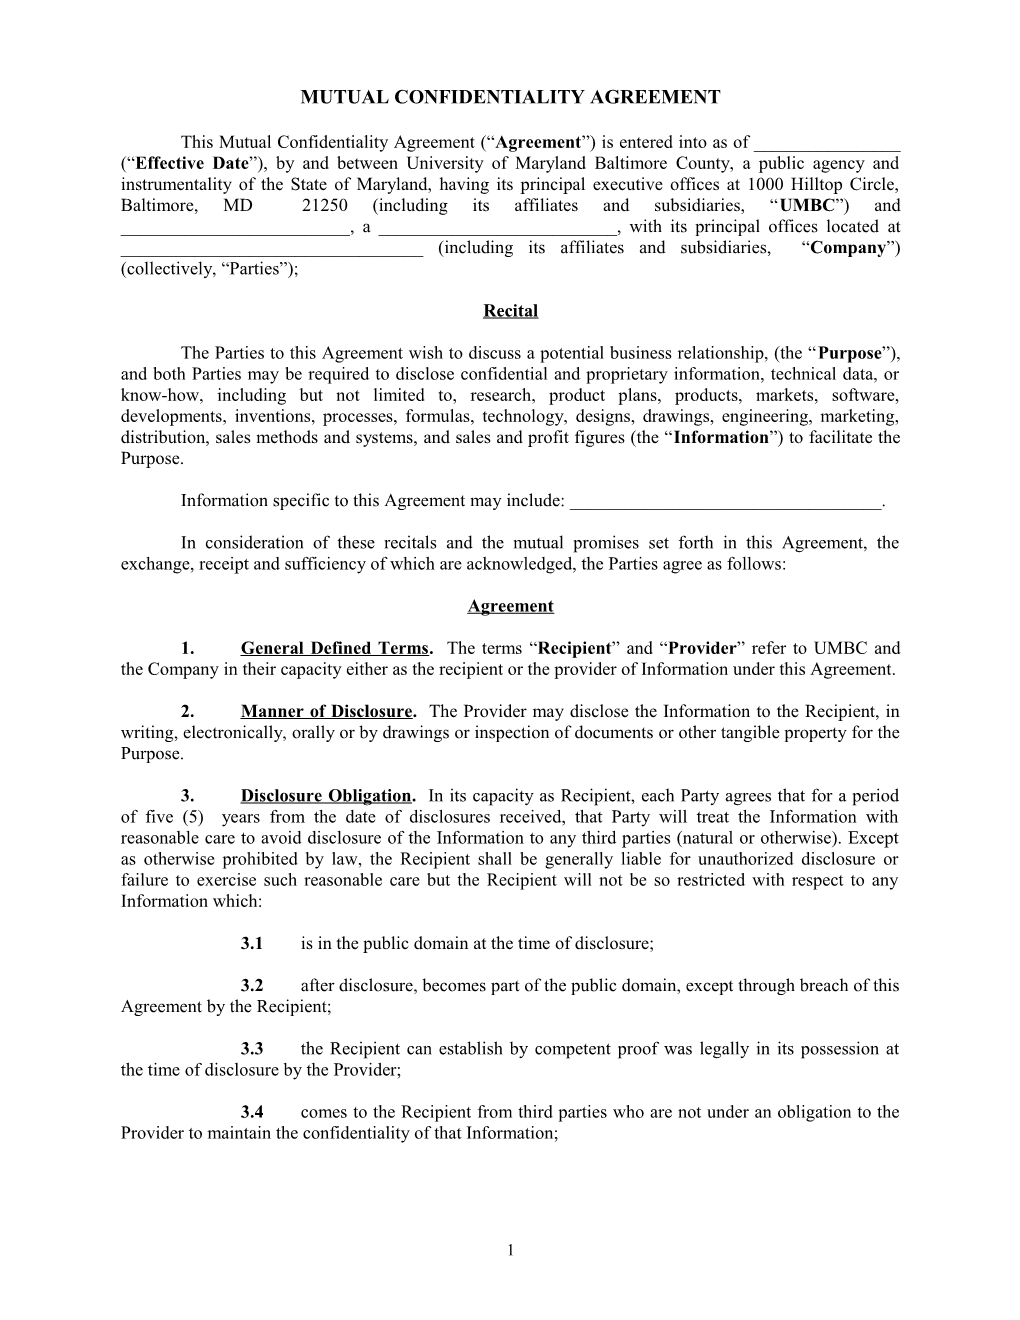 Mutual Confidentiality Agreement s1